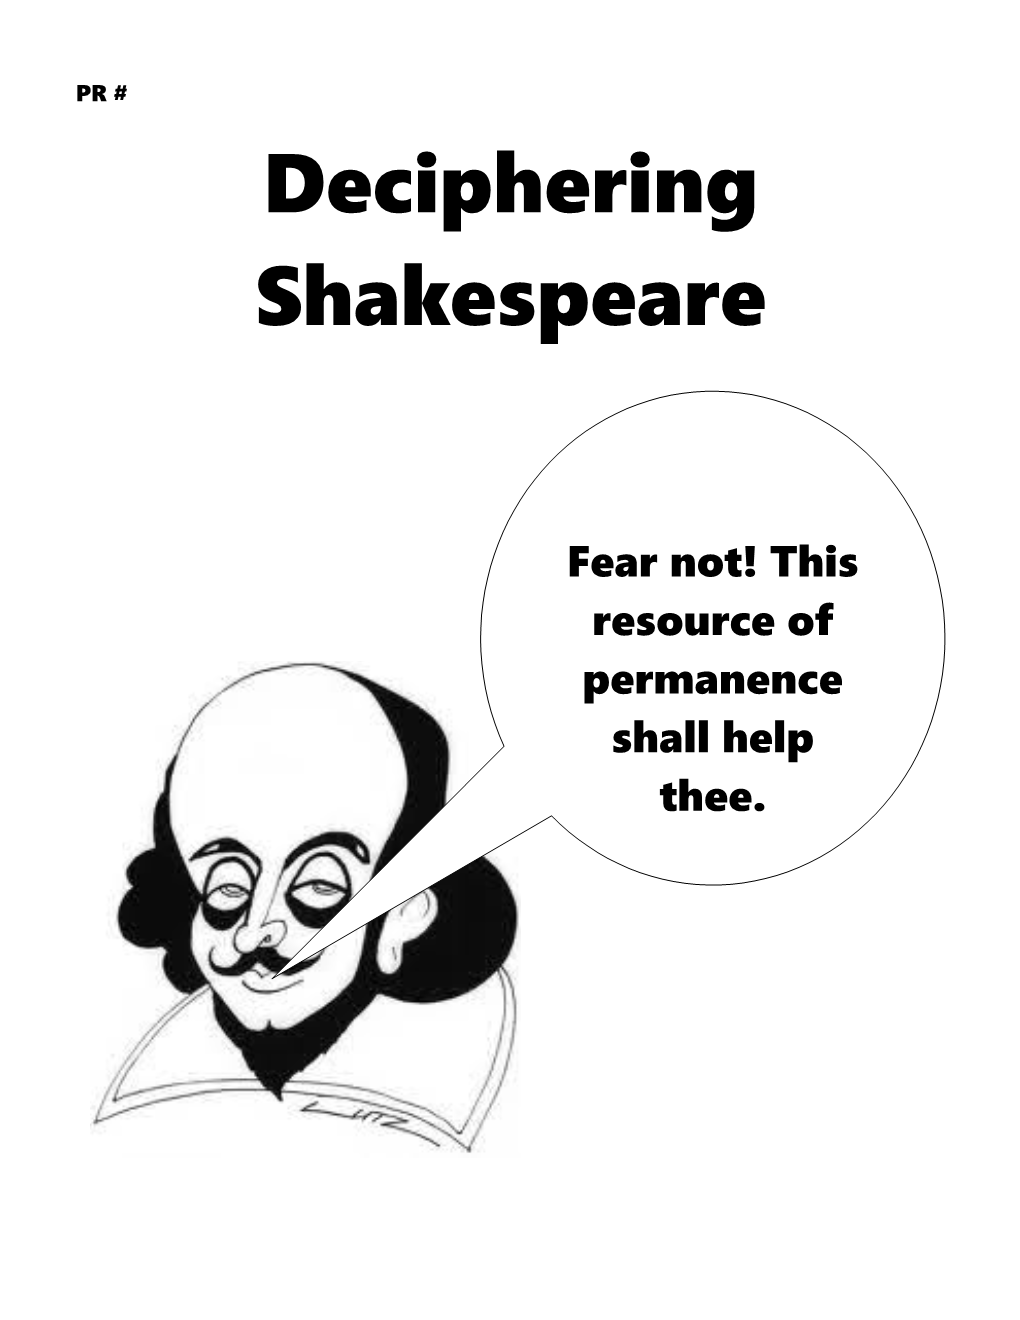 Here S a Handy List of Some of the More Common Words Shakespeare Used